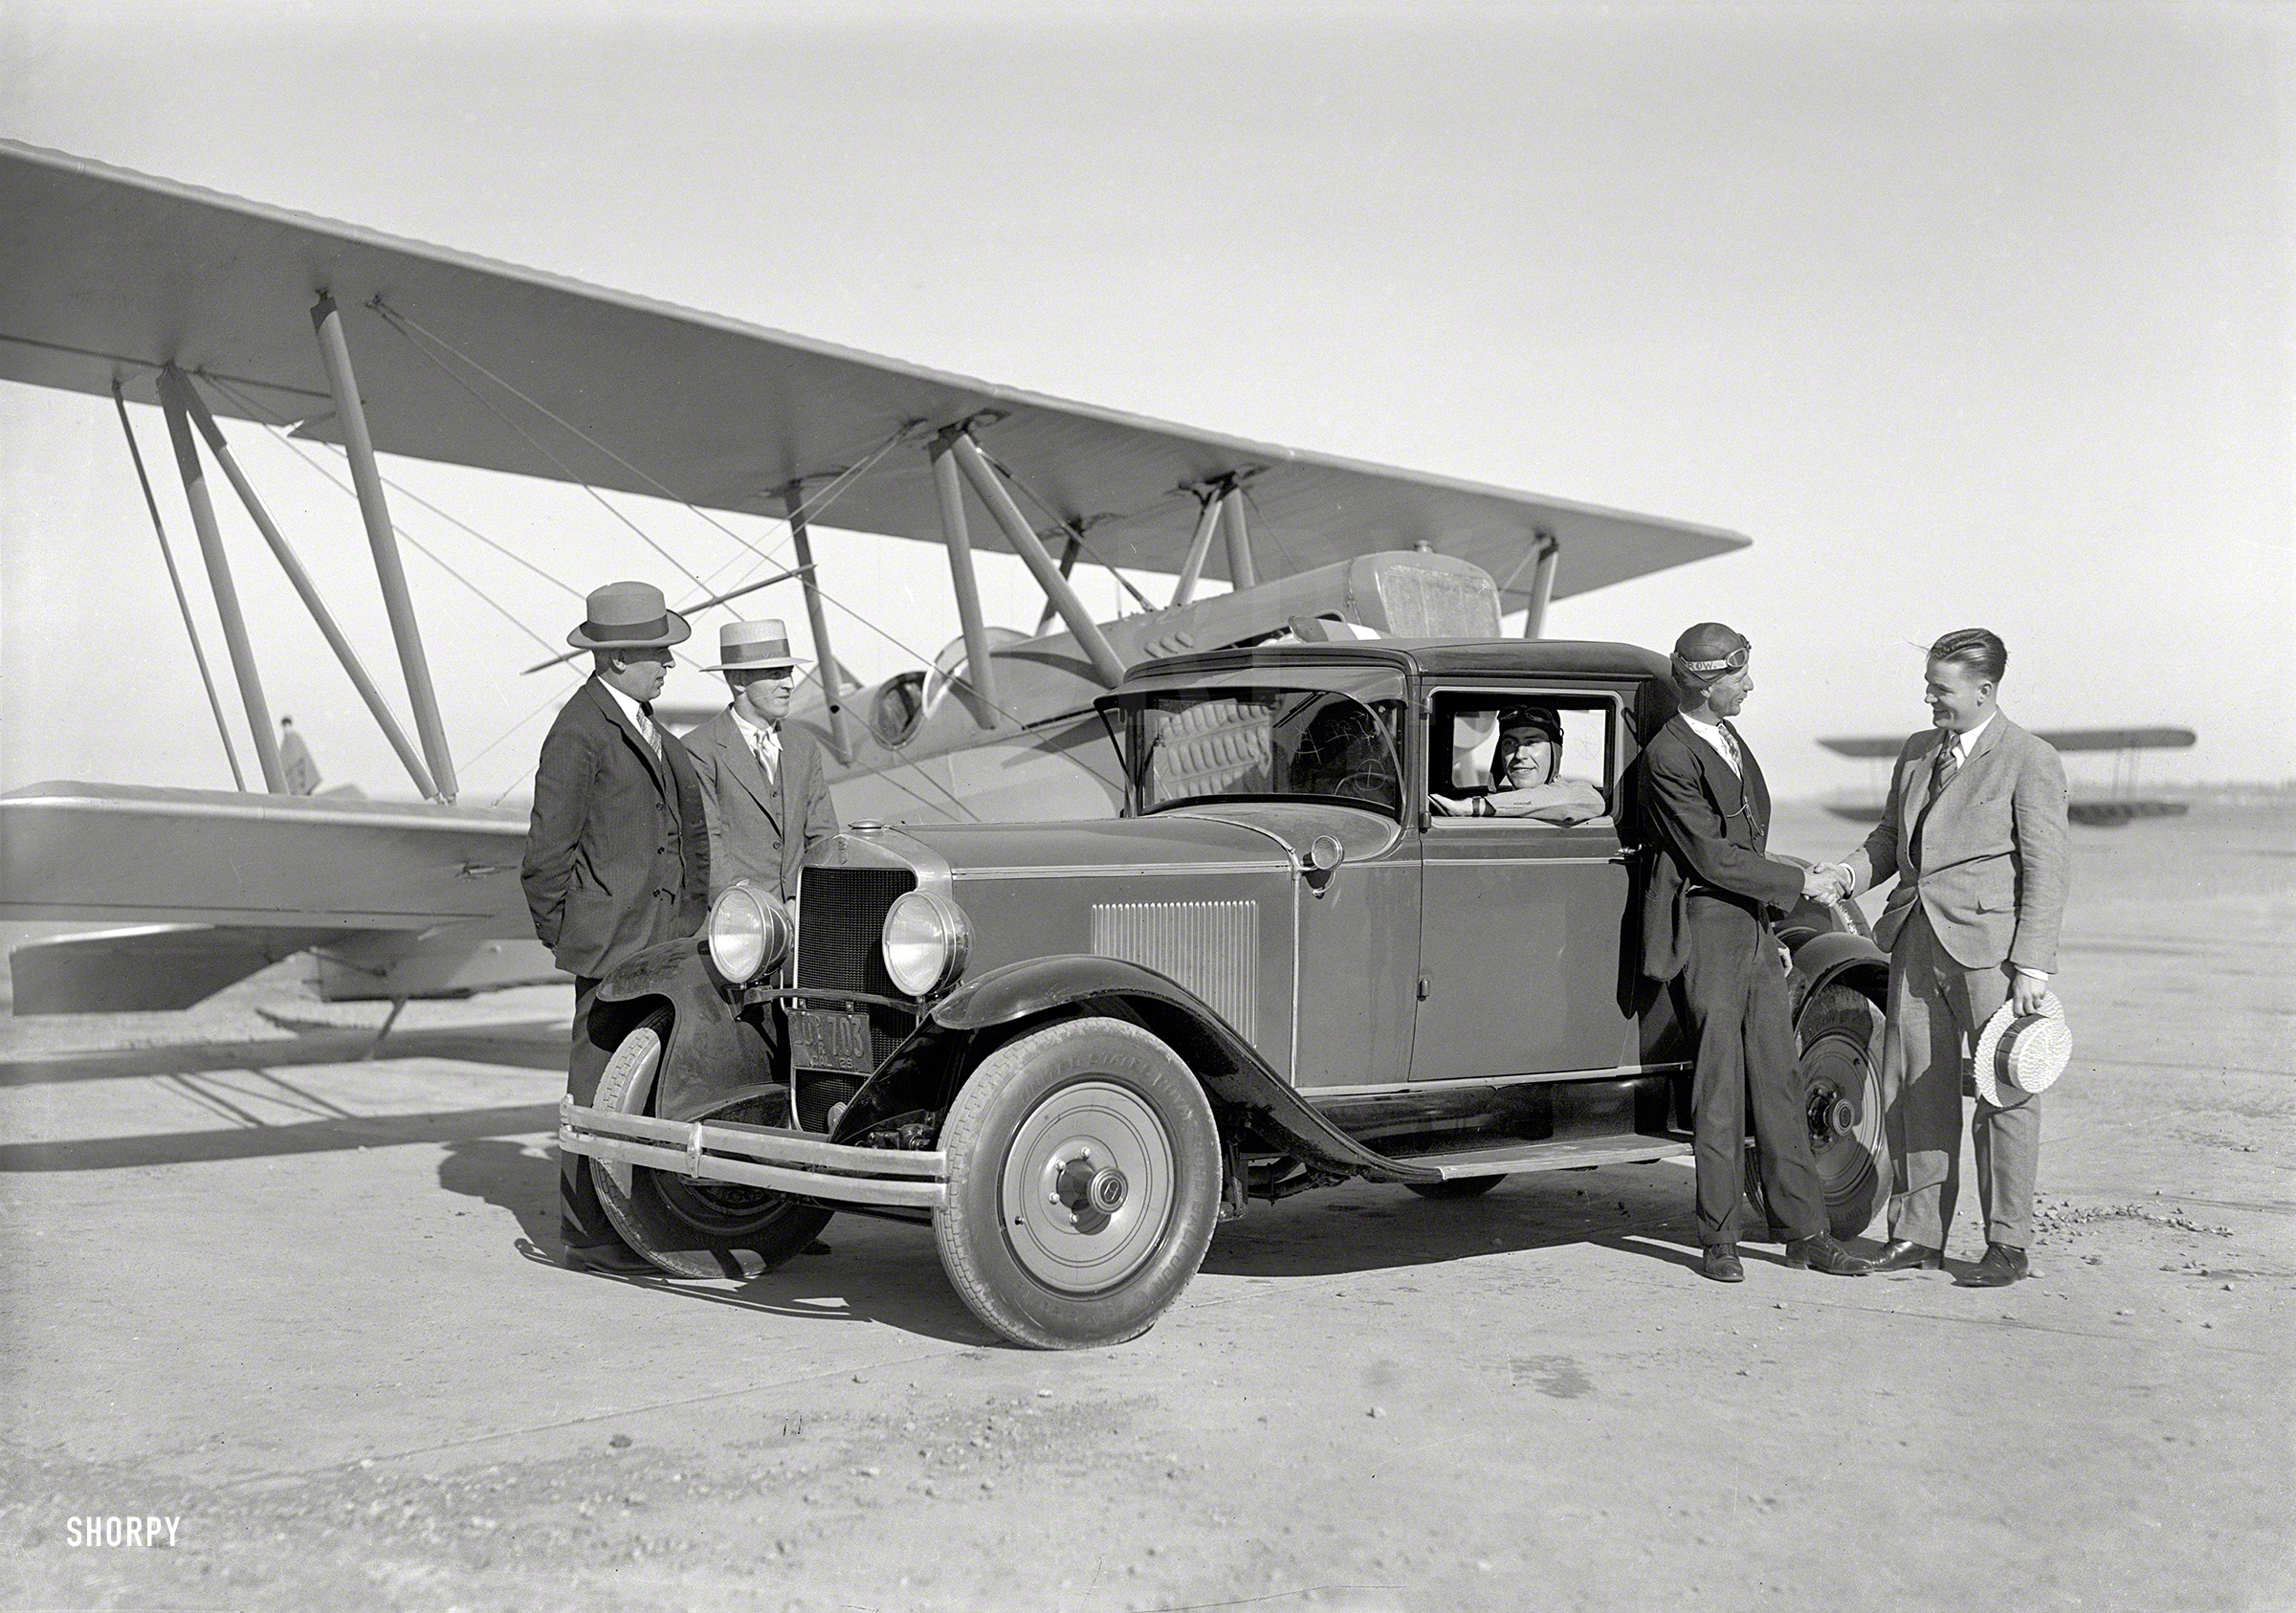 San Francisco, 1929. "Paige coupe and biplane at Mills Field." Latest entry in the Shorpy Catalog of Quaint Conveyances. 5x7 glass negative. View full size.